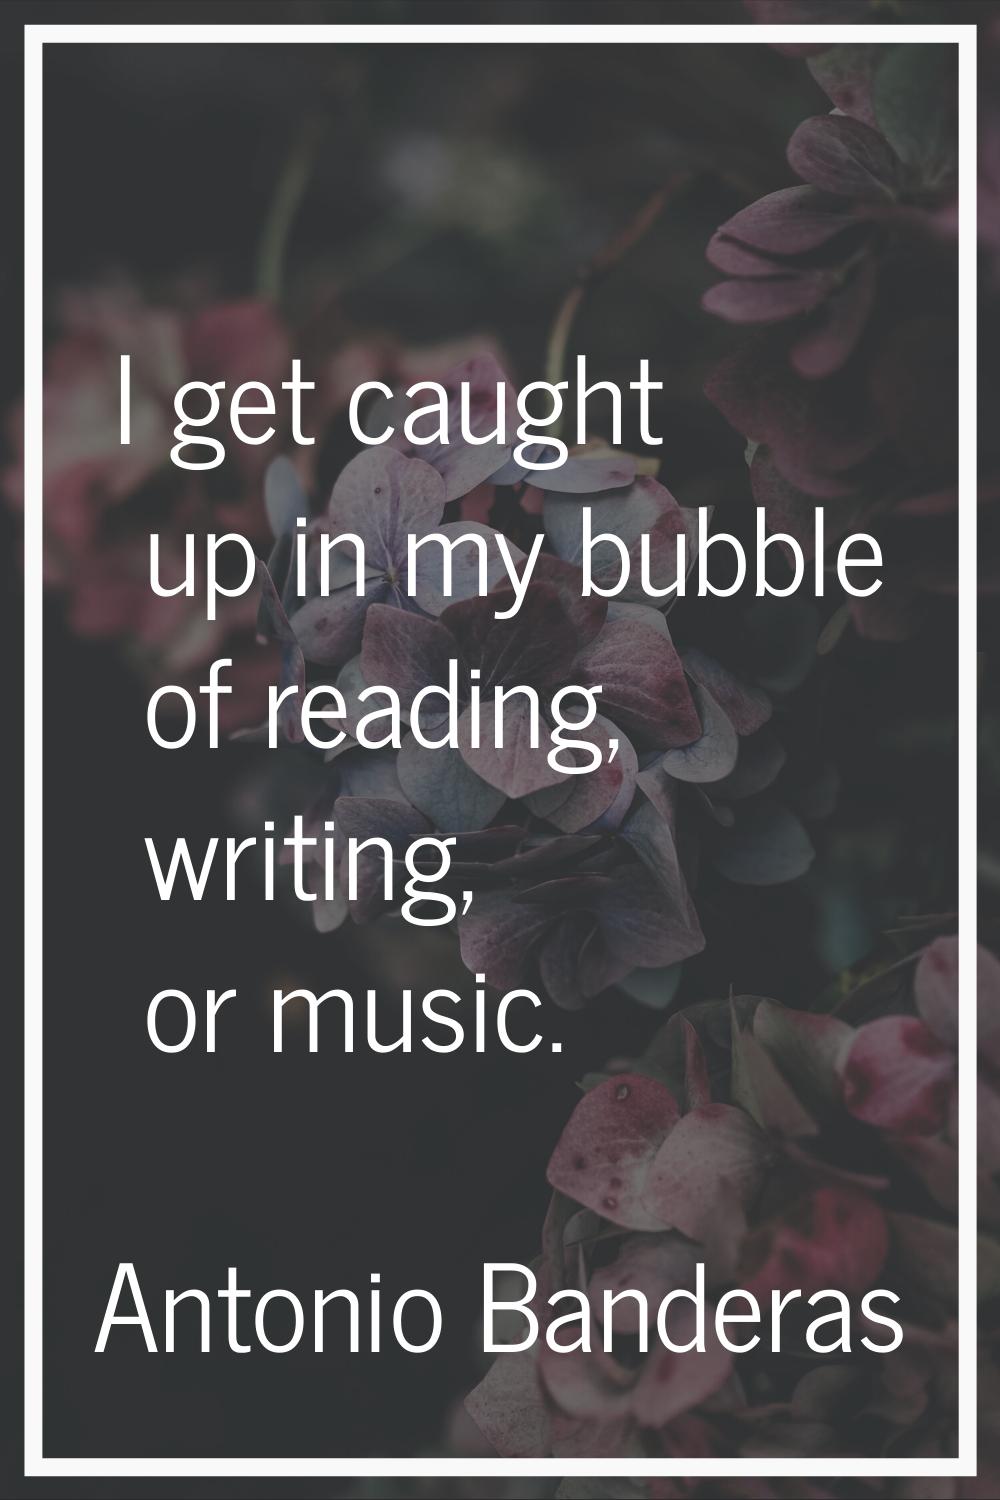 I get caught up in my bubble of reading, writing, or music.